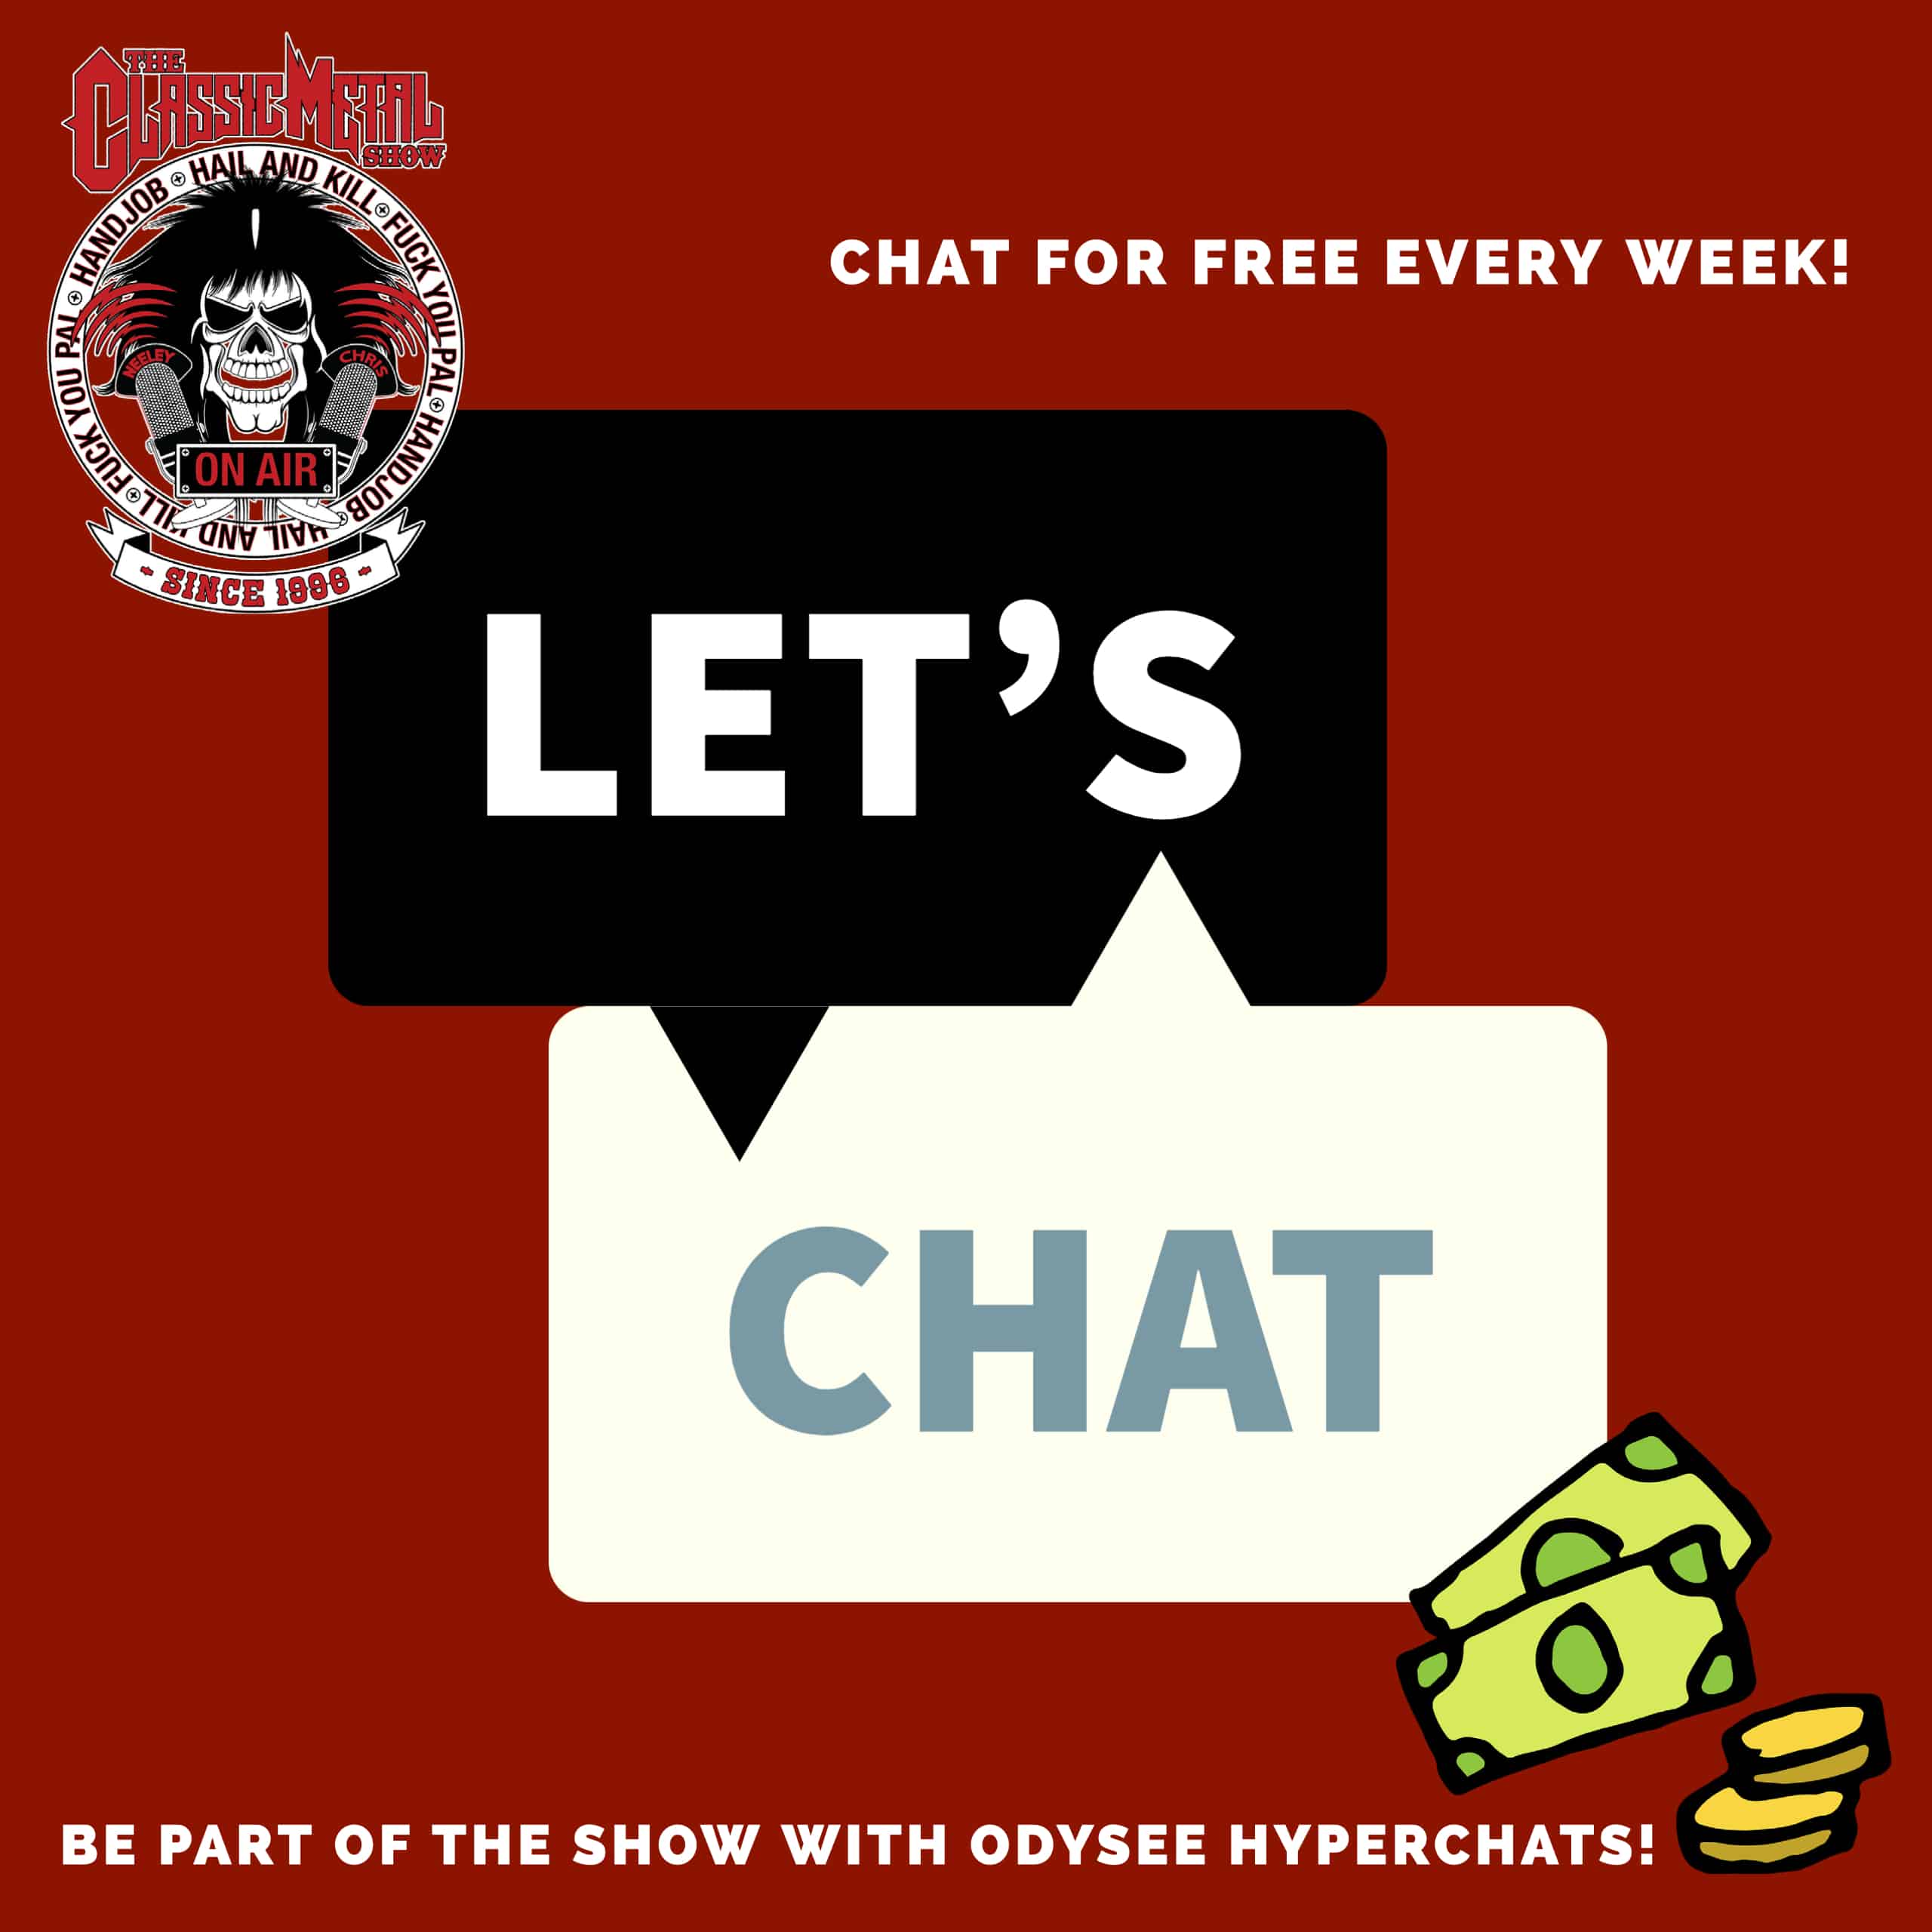 Image: Let's Chat!